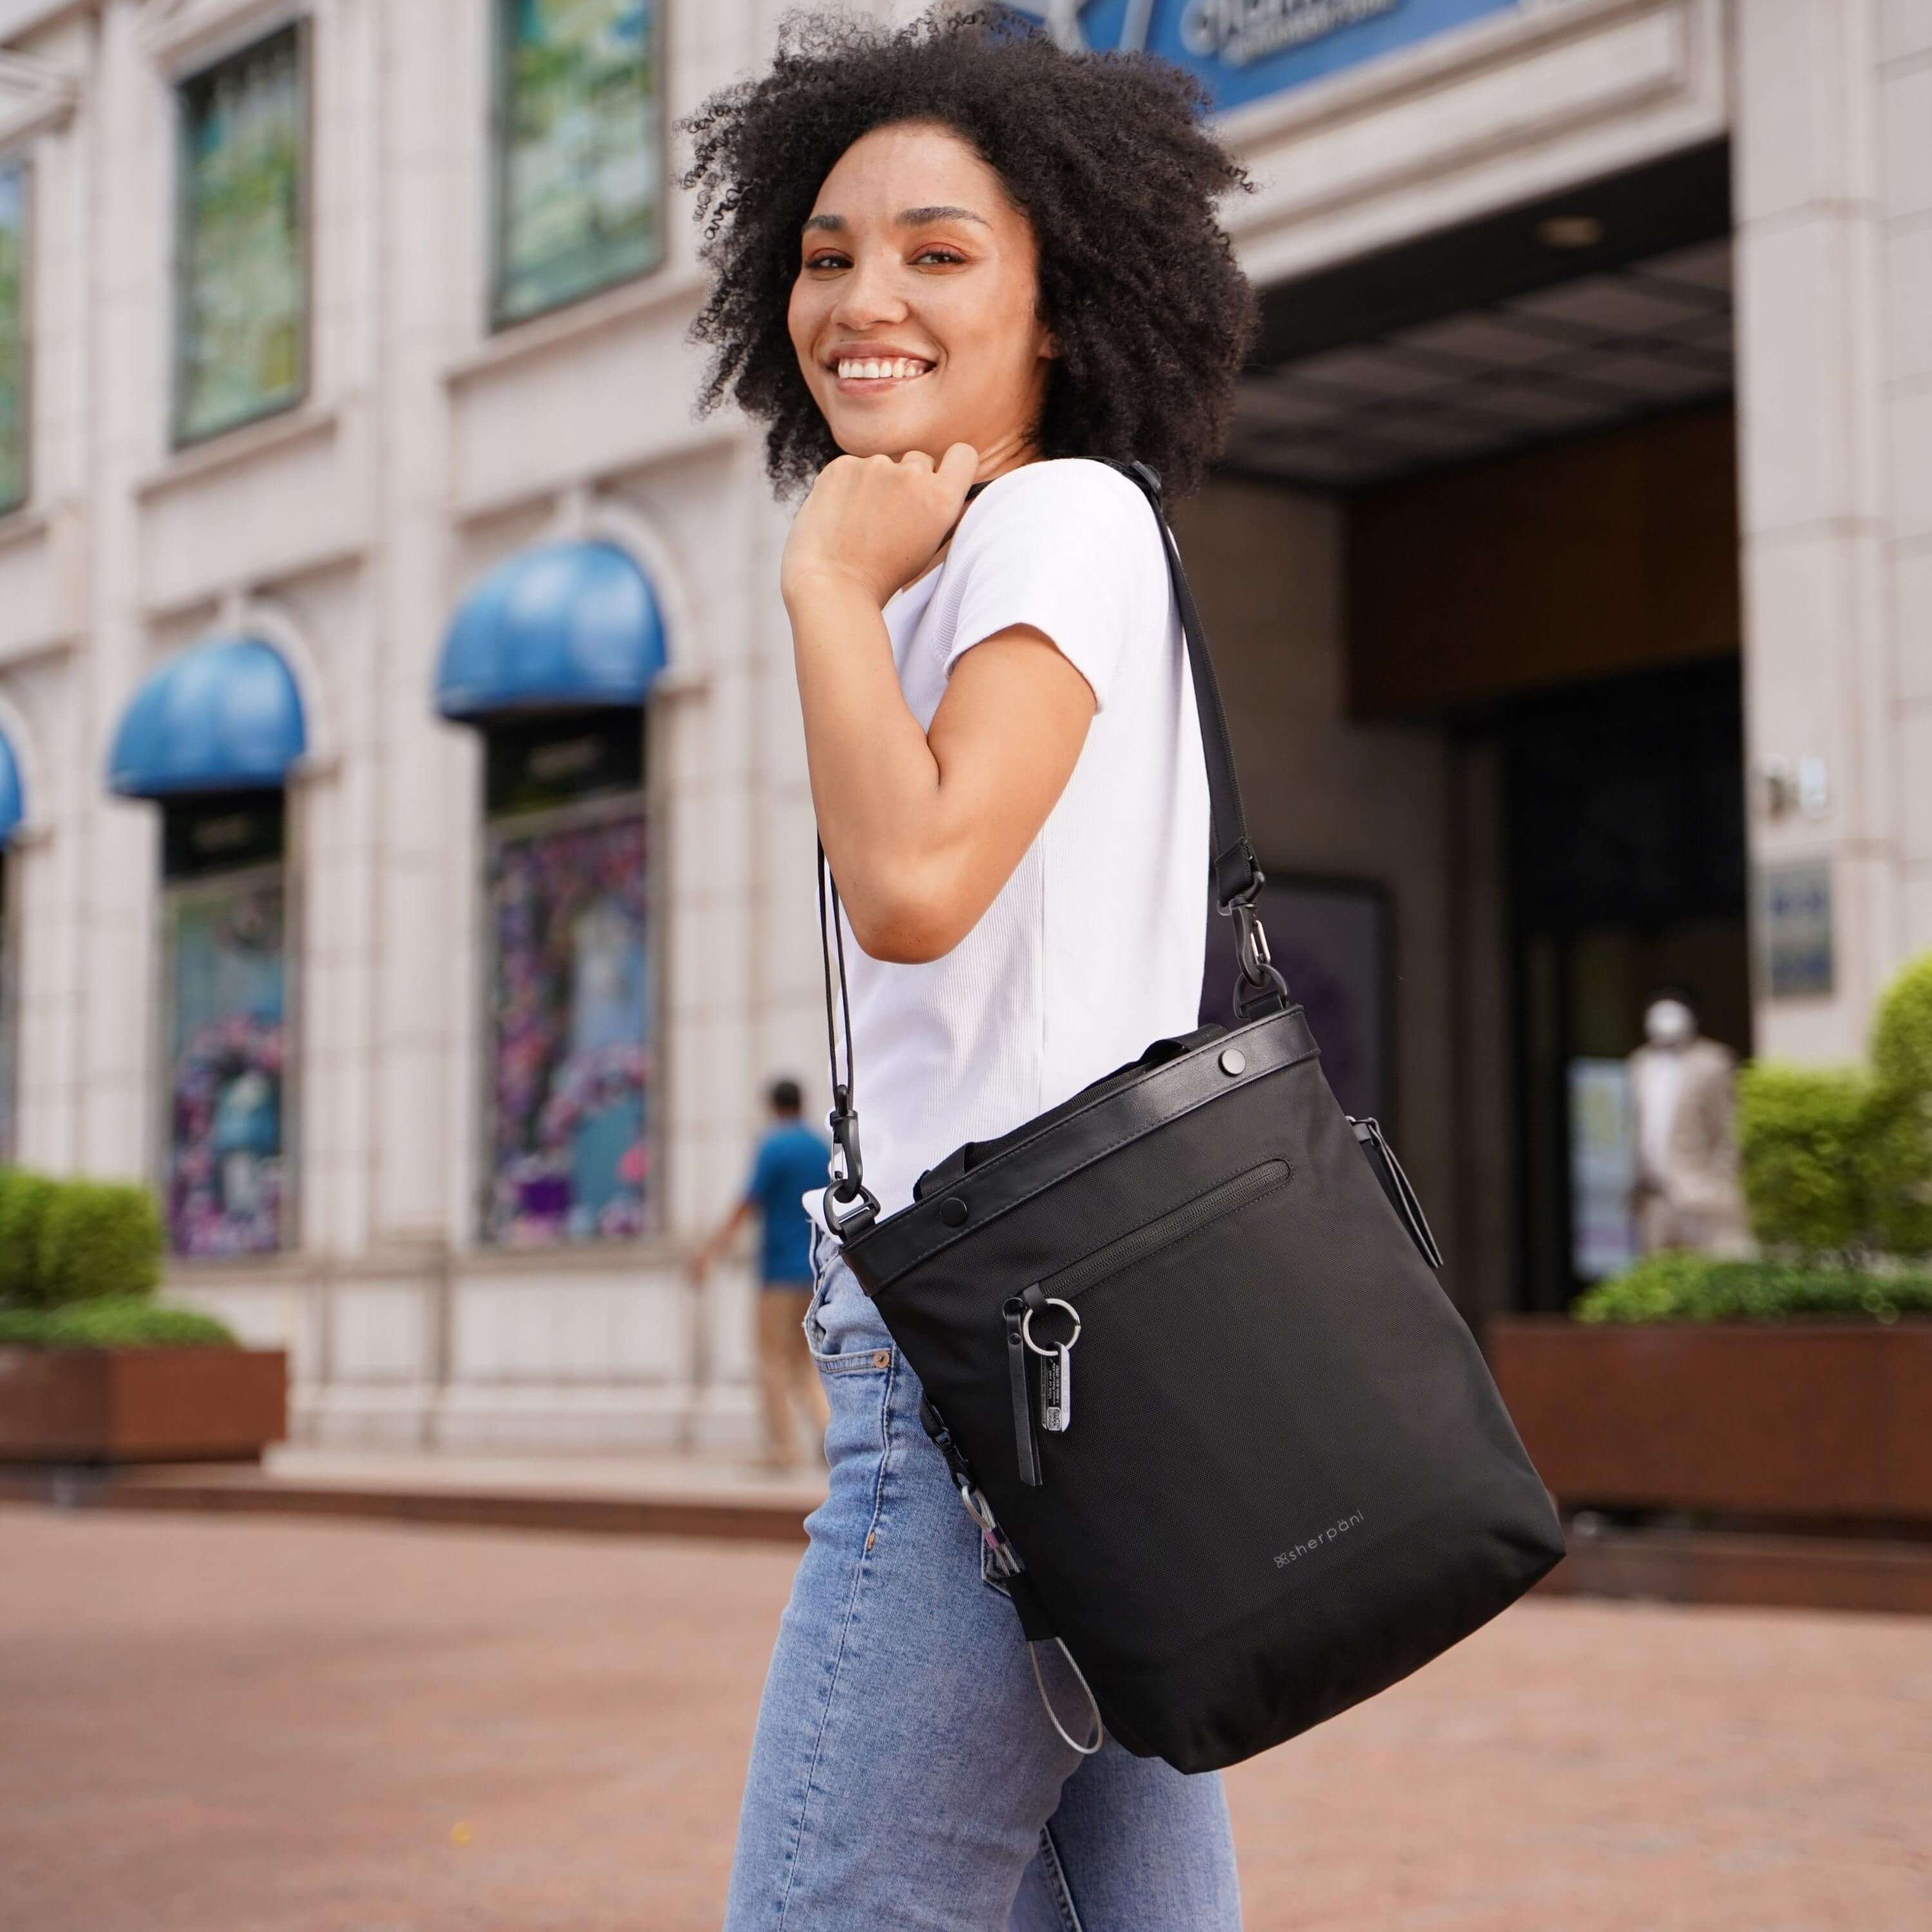 A curly haired model is standing on the street of an outdoor shopping mall. She is wearing a white tee shirt and jeans, and is smiling at the camera. Over her shoulder is Sherpani's Anti-Theft bag, the Geo AT in Carbon. 